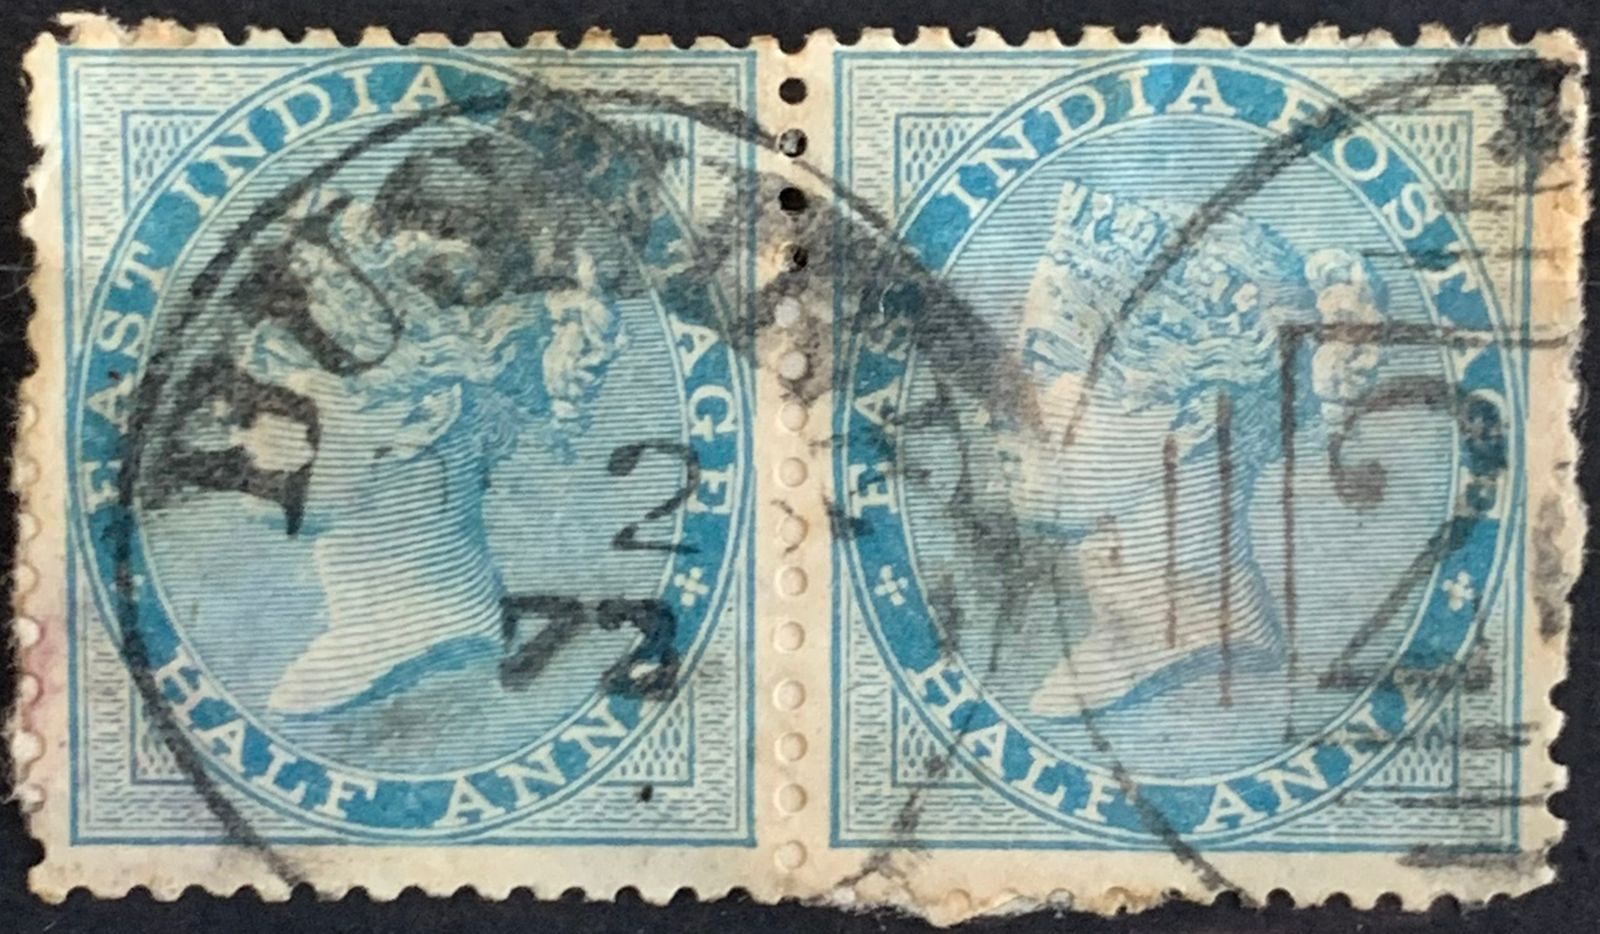 India 1865 QV 1/2a Pair Used Abroad in BUSHIRE Fine Cancelled